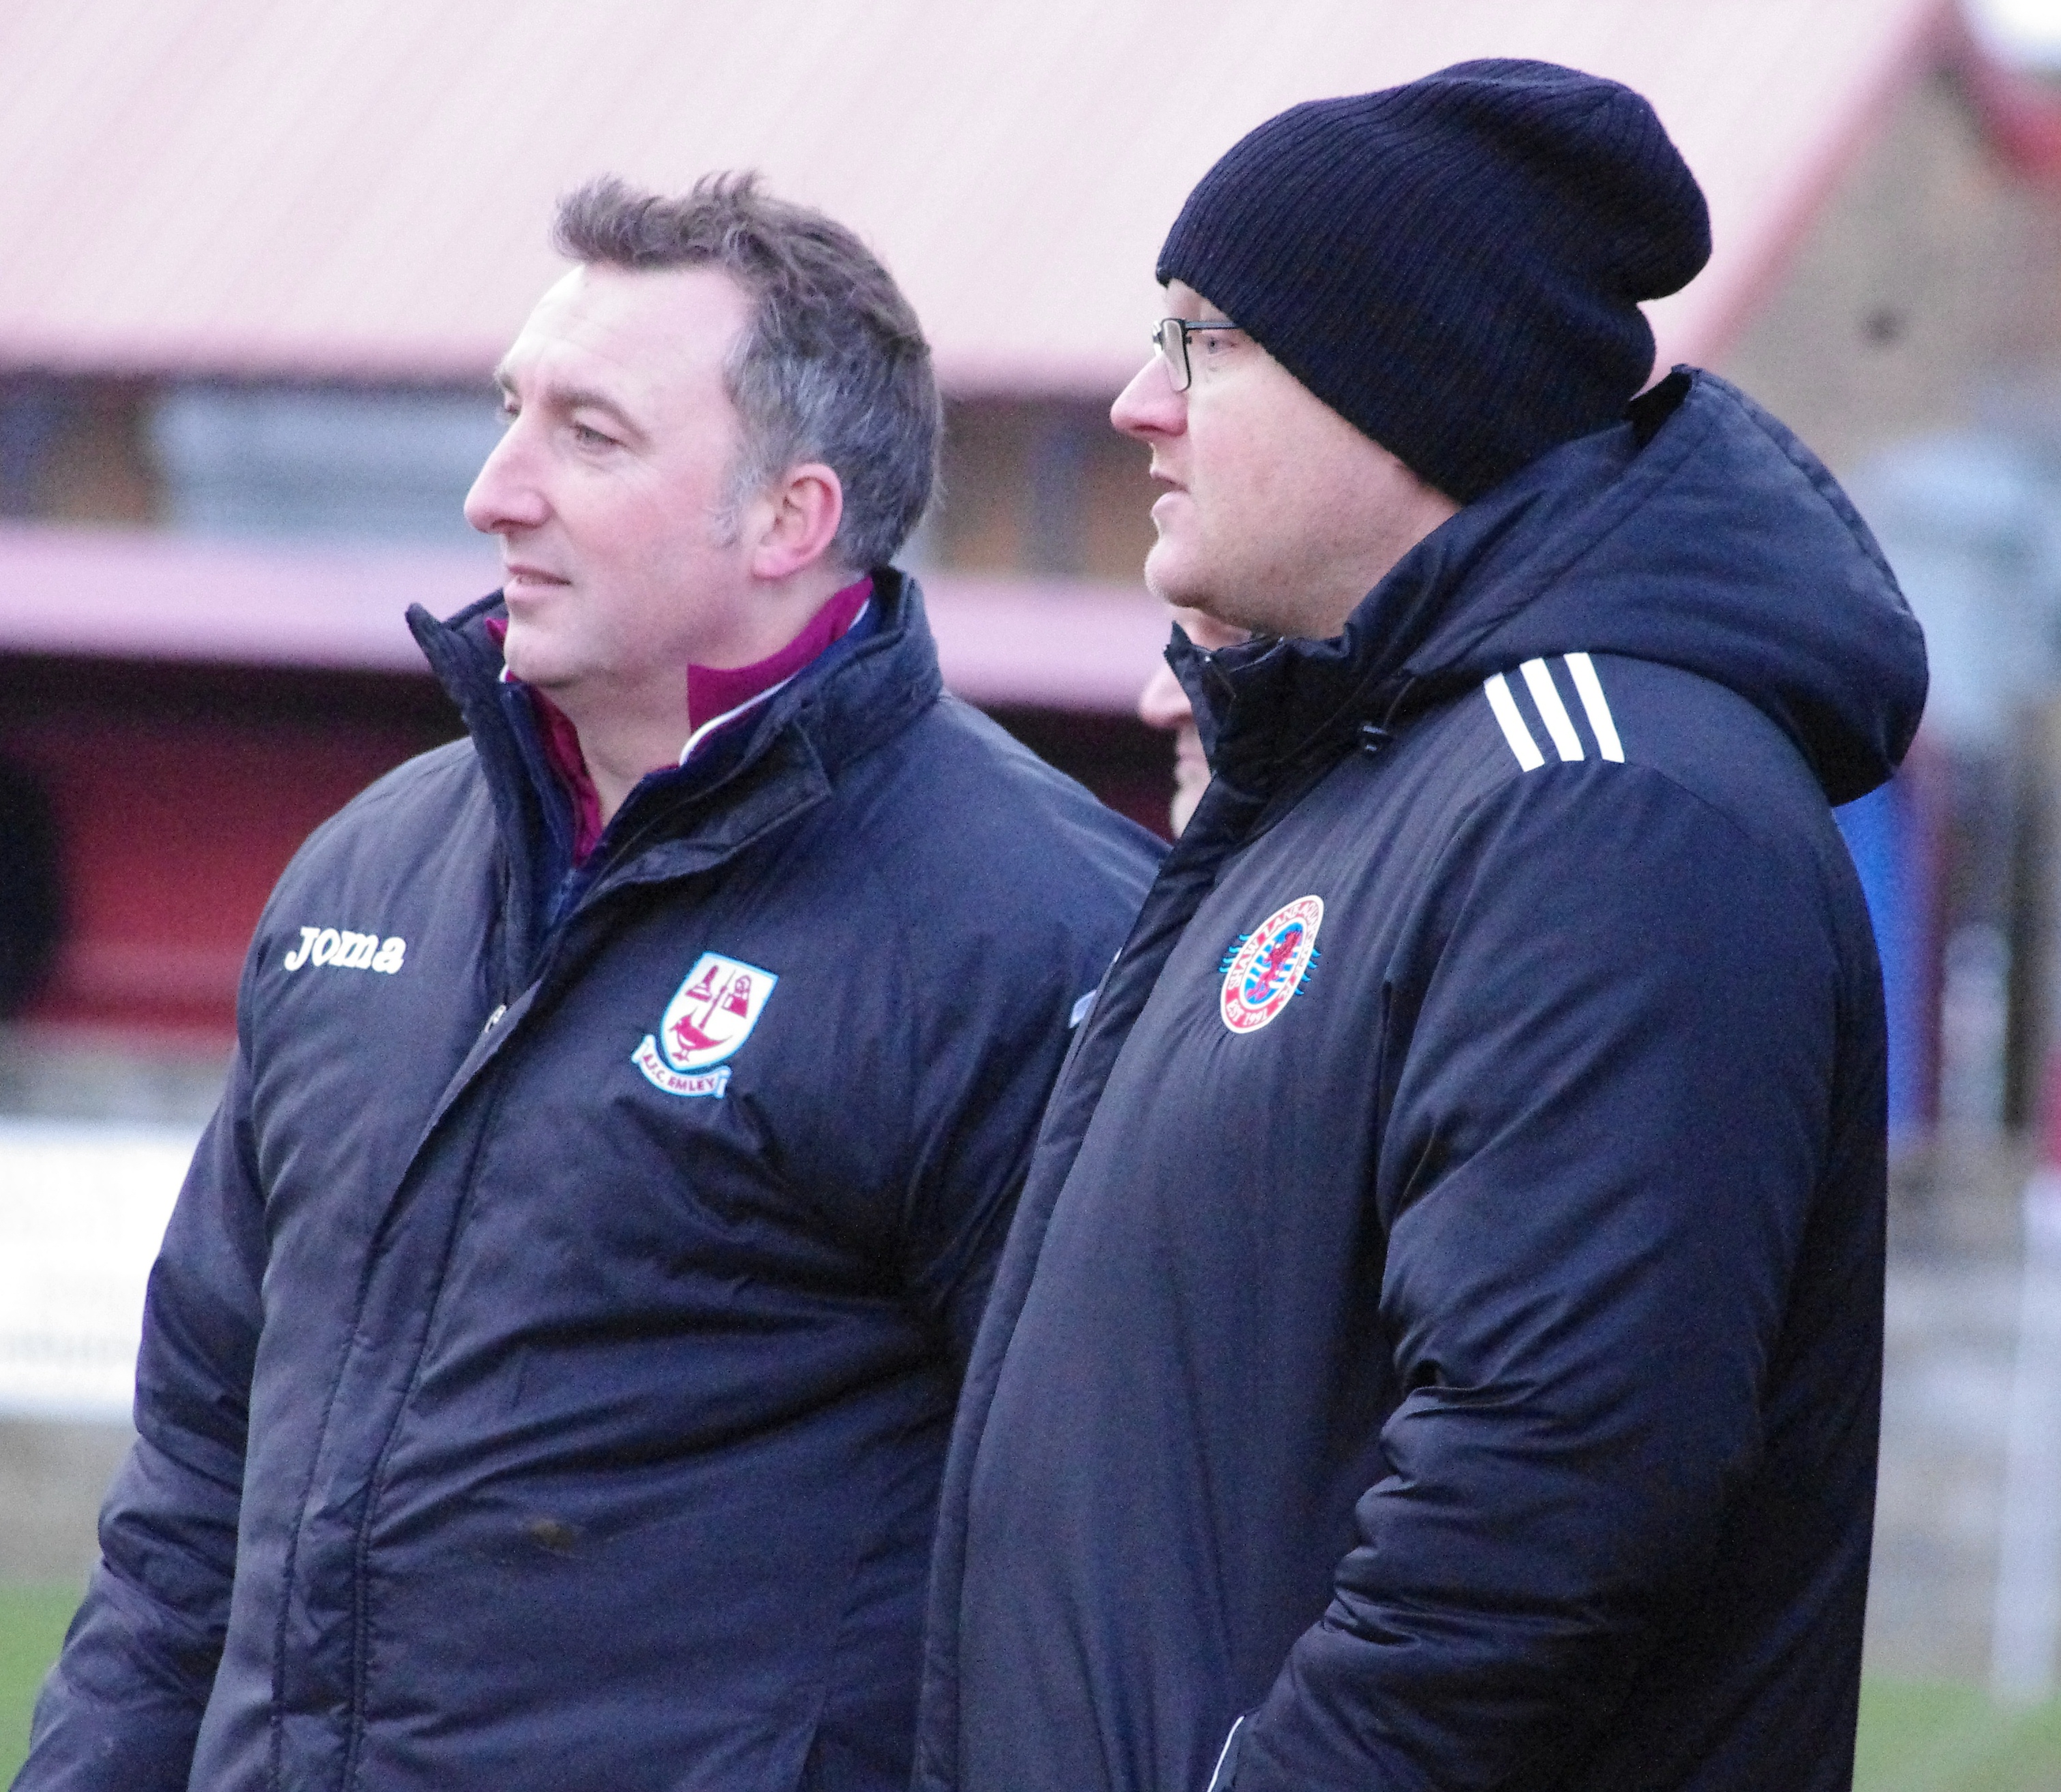 AFC Emley boss Darren Hepworth (left) and Shaw Lane Aquaforce manager Simon Houghton say respect works both ways